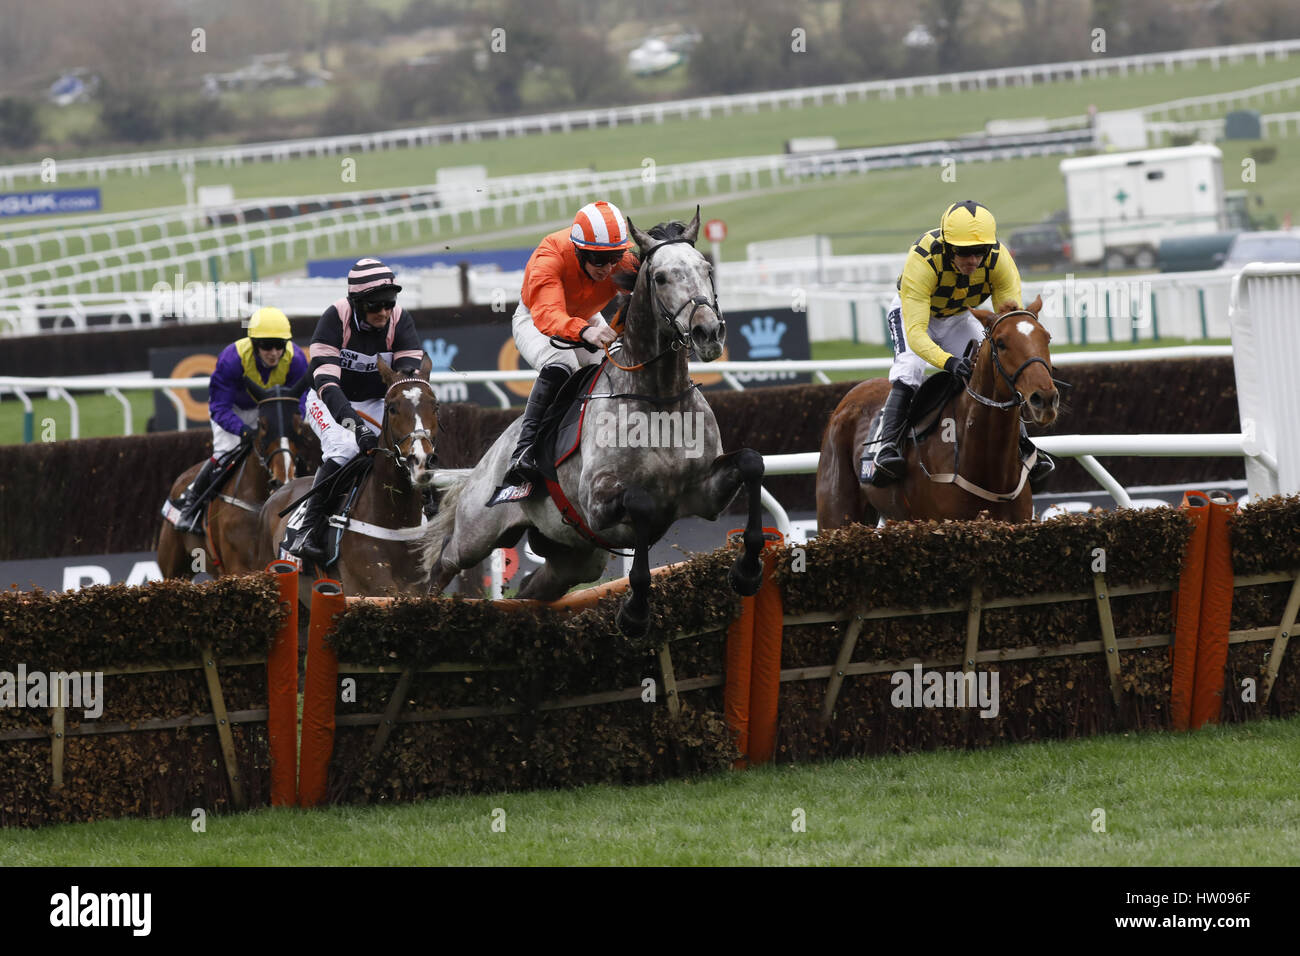 Cheltenham, UK. 14th March 2017. Labaik ridden by Jack Kennedy wins the Sky Bet Supreme Novices Hurdle Grade 1 at Cheltenham-Cheltenham-Racecourse/Great Britain. Second place: Melon ridden by Ruby Walsh.  Credit: dpa picture alliance/Alamy Live News Stock Photo